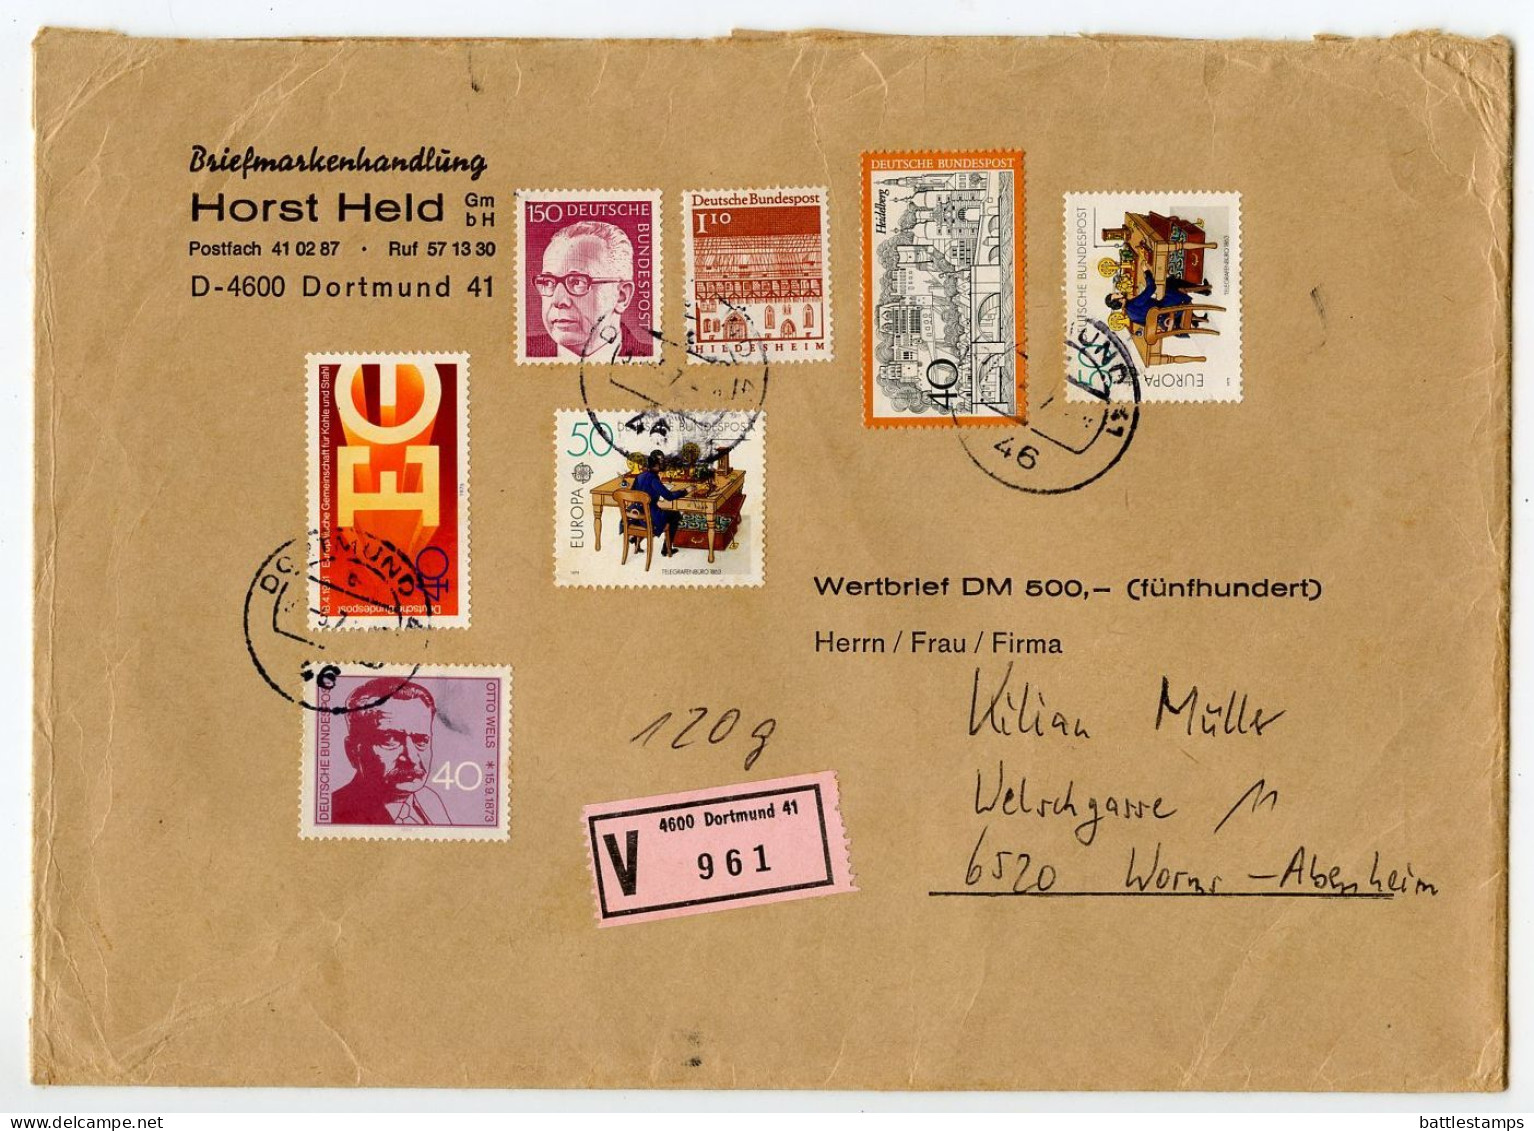 Germany, West 1979 Insured V-Label Cover; Dortmund To Worms-Abenheim; Mix Of Stamps - Storia Postale